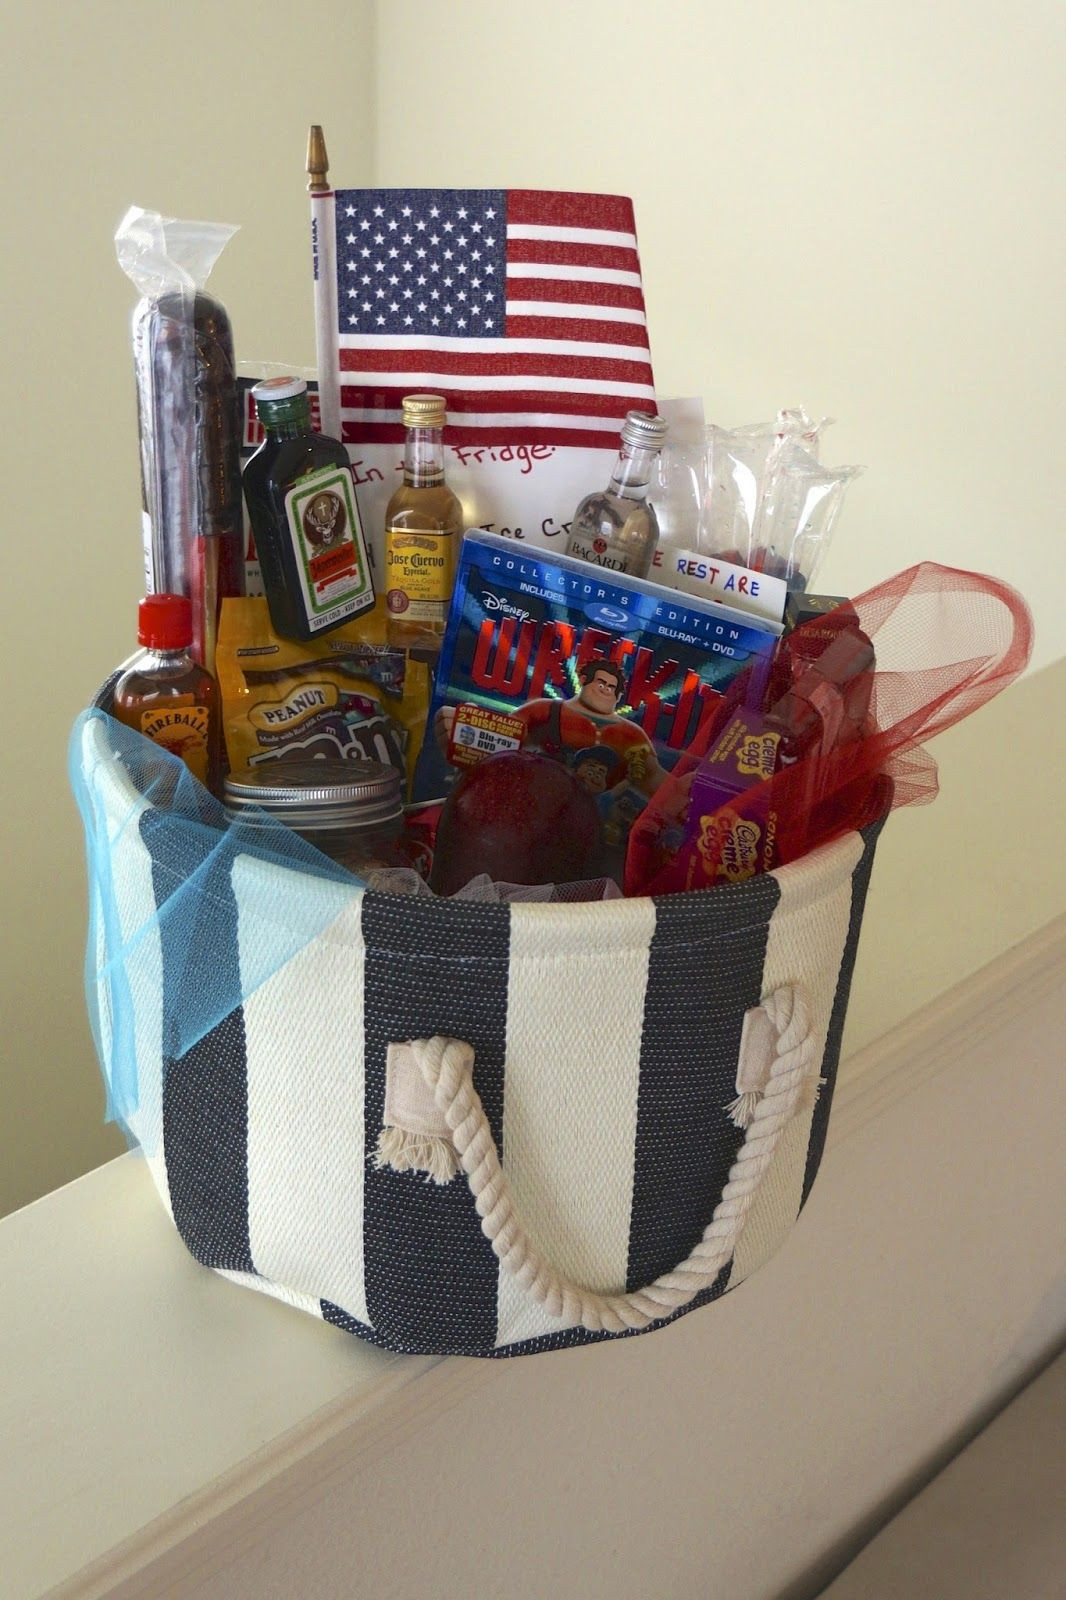 Welcome Home Gift Basket Ideas
 Wel e Home The Final "Care Package" How to create a fun